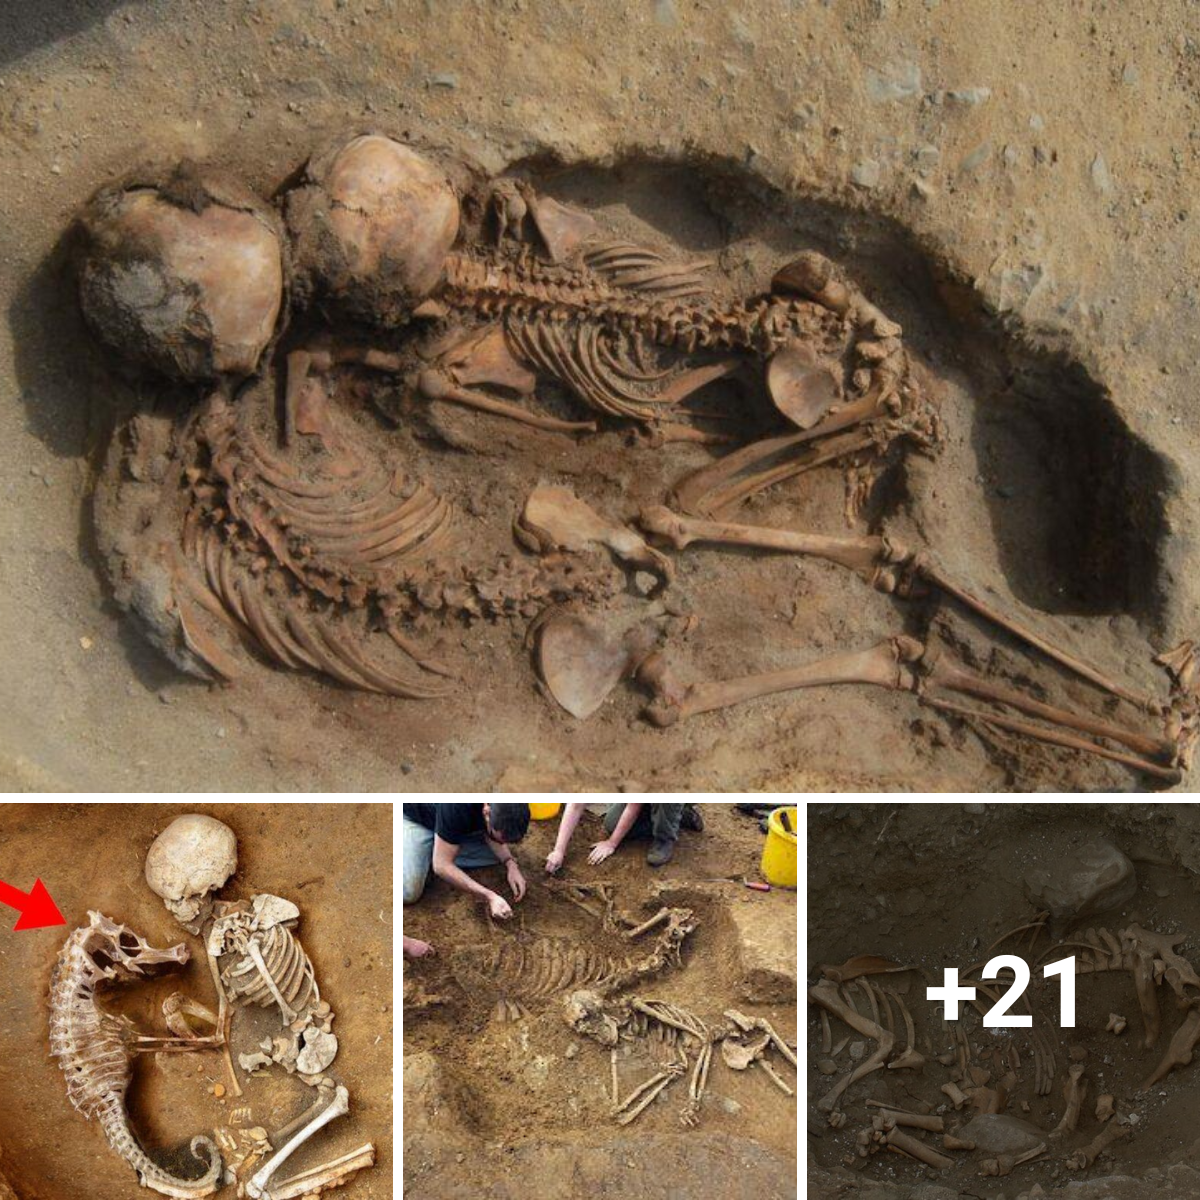 Seahorse and baby bones discovered during an ancient burial ceremony “gives viewers chills”